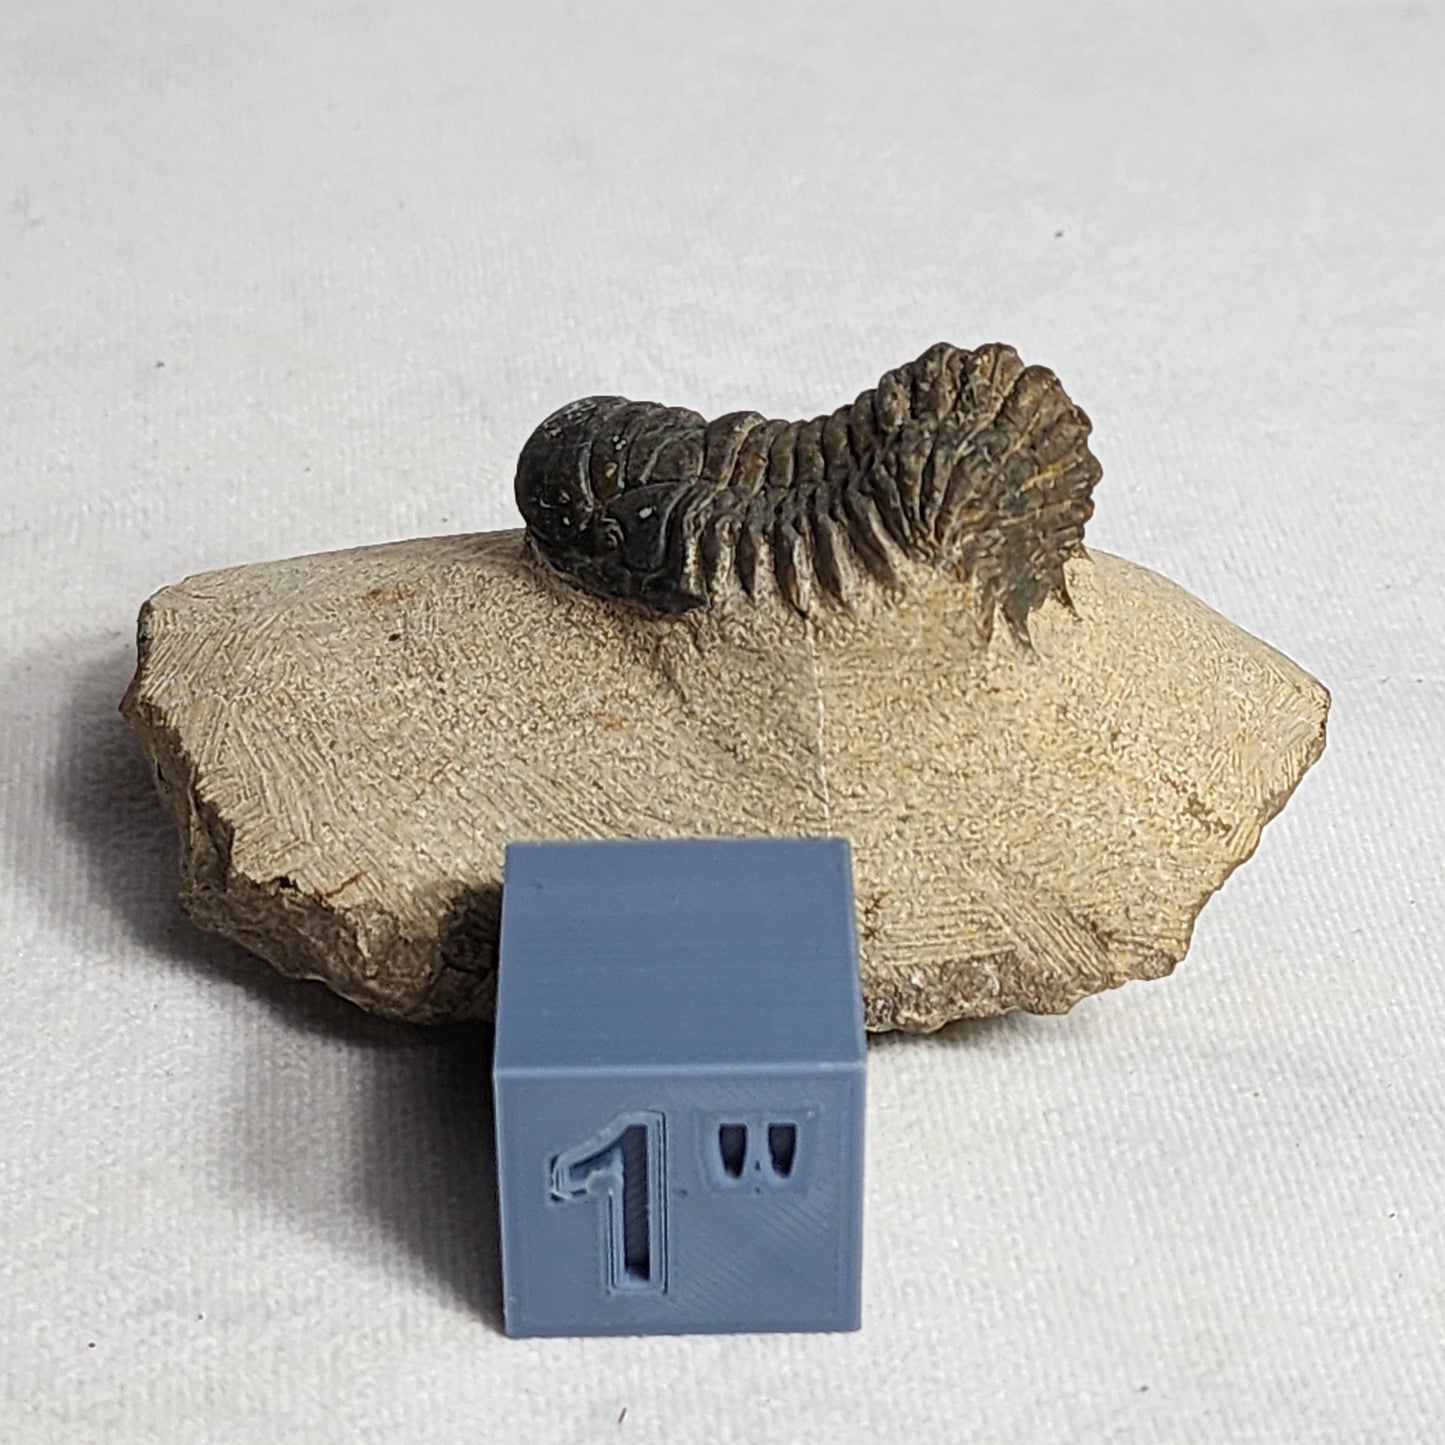 Appealing Trilobite from Morocco